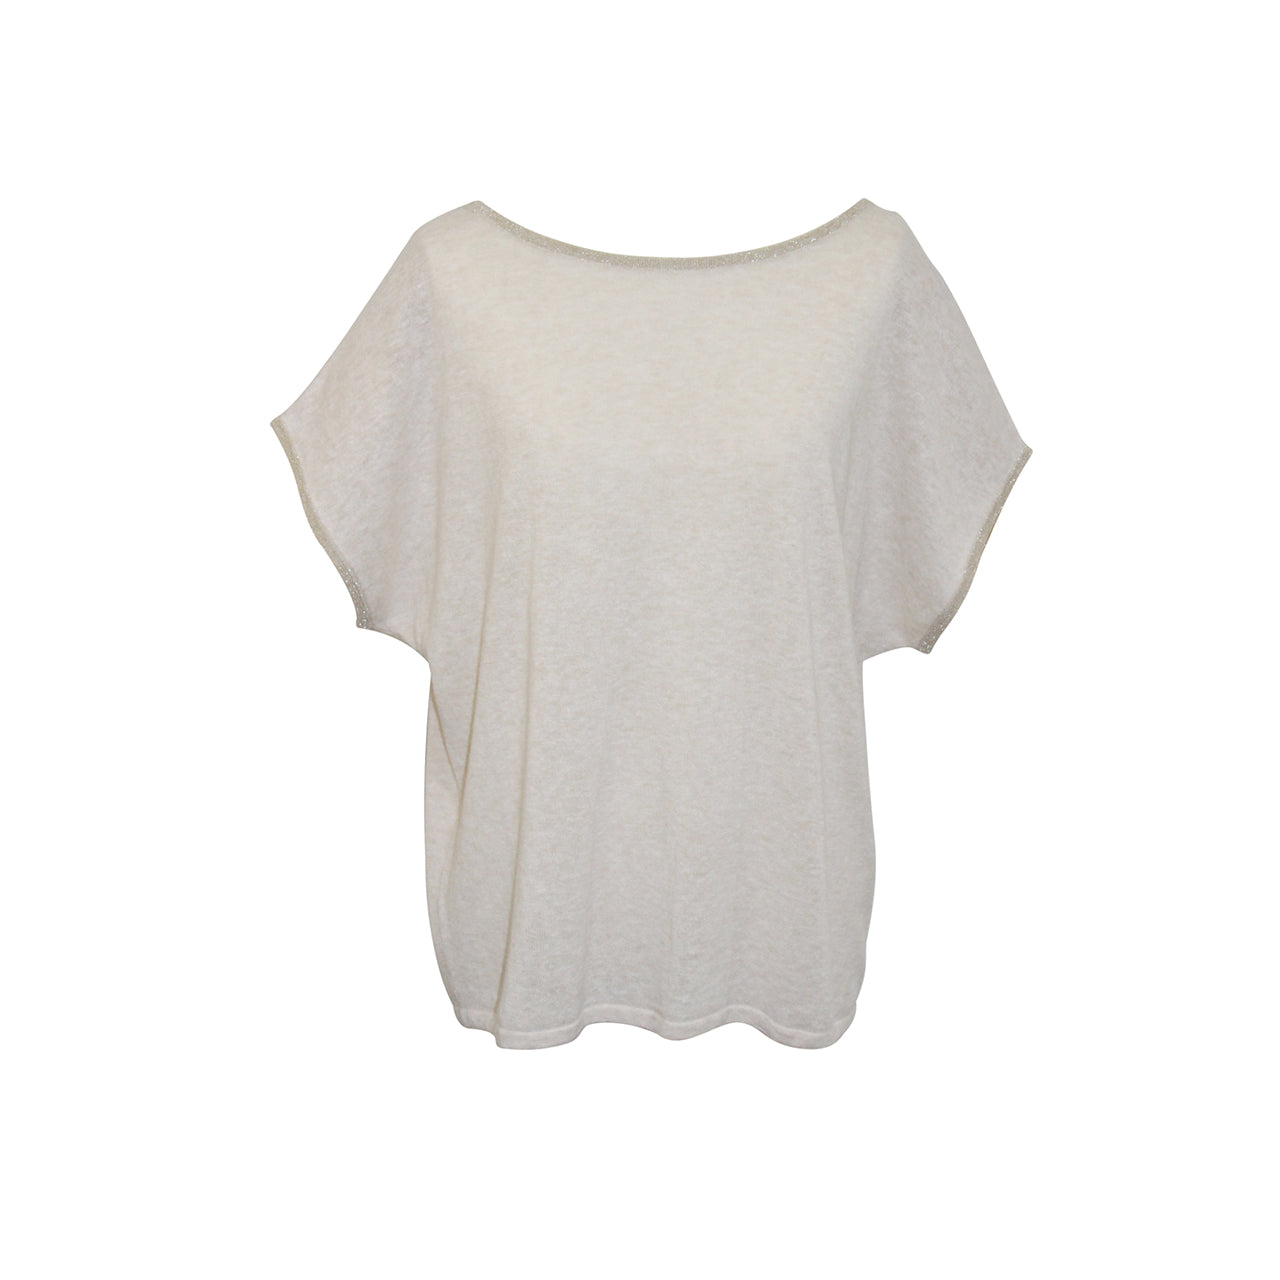 Get the Look: LORNA Loose Knit Butterfly Tee